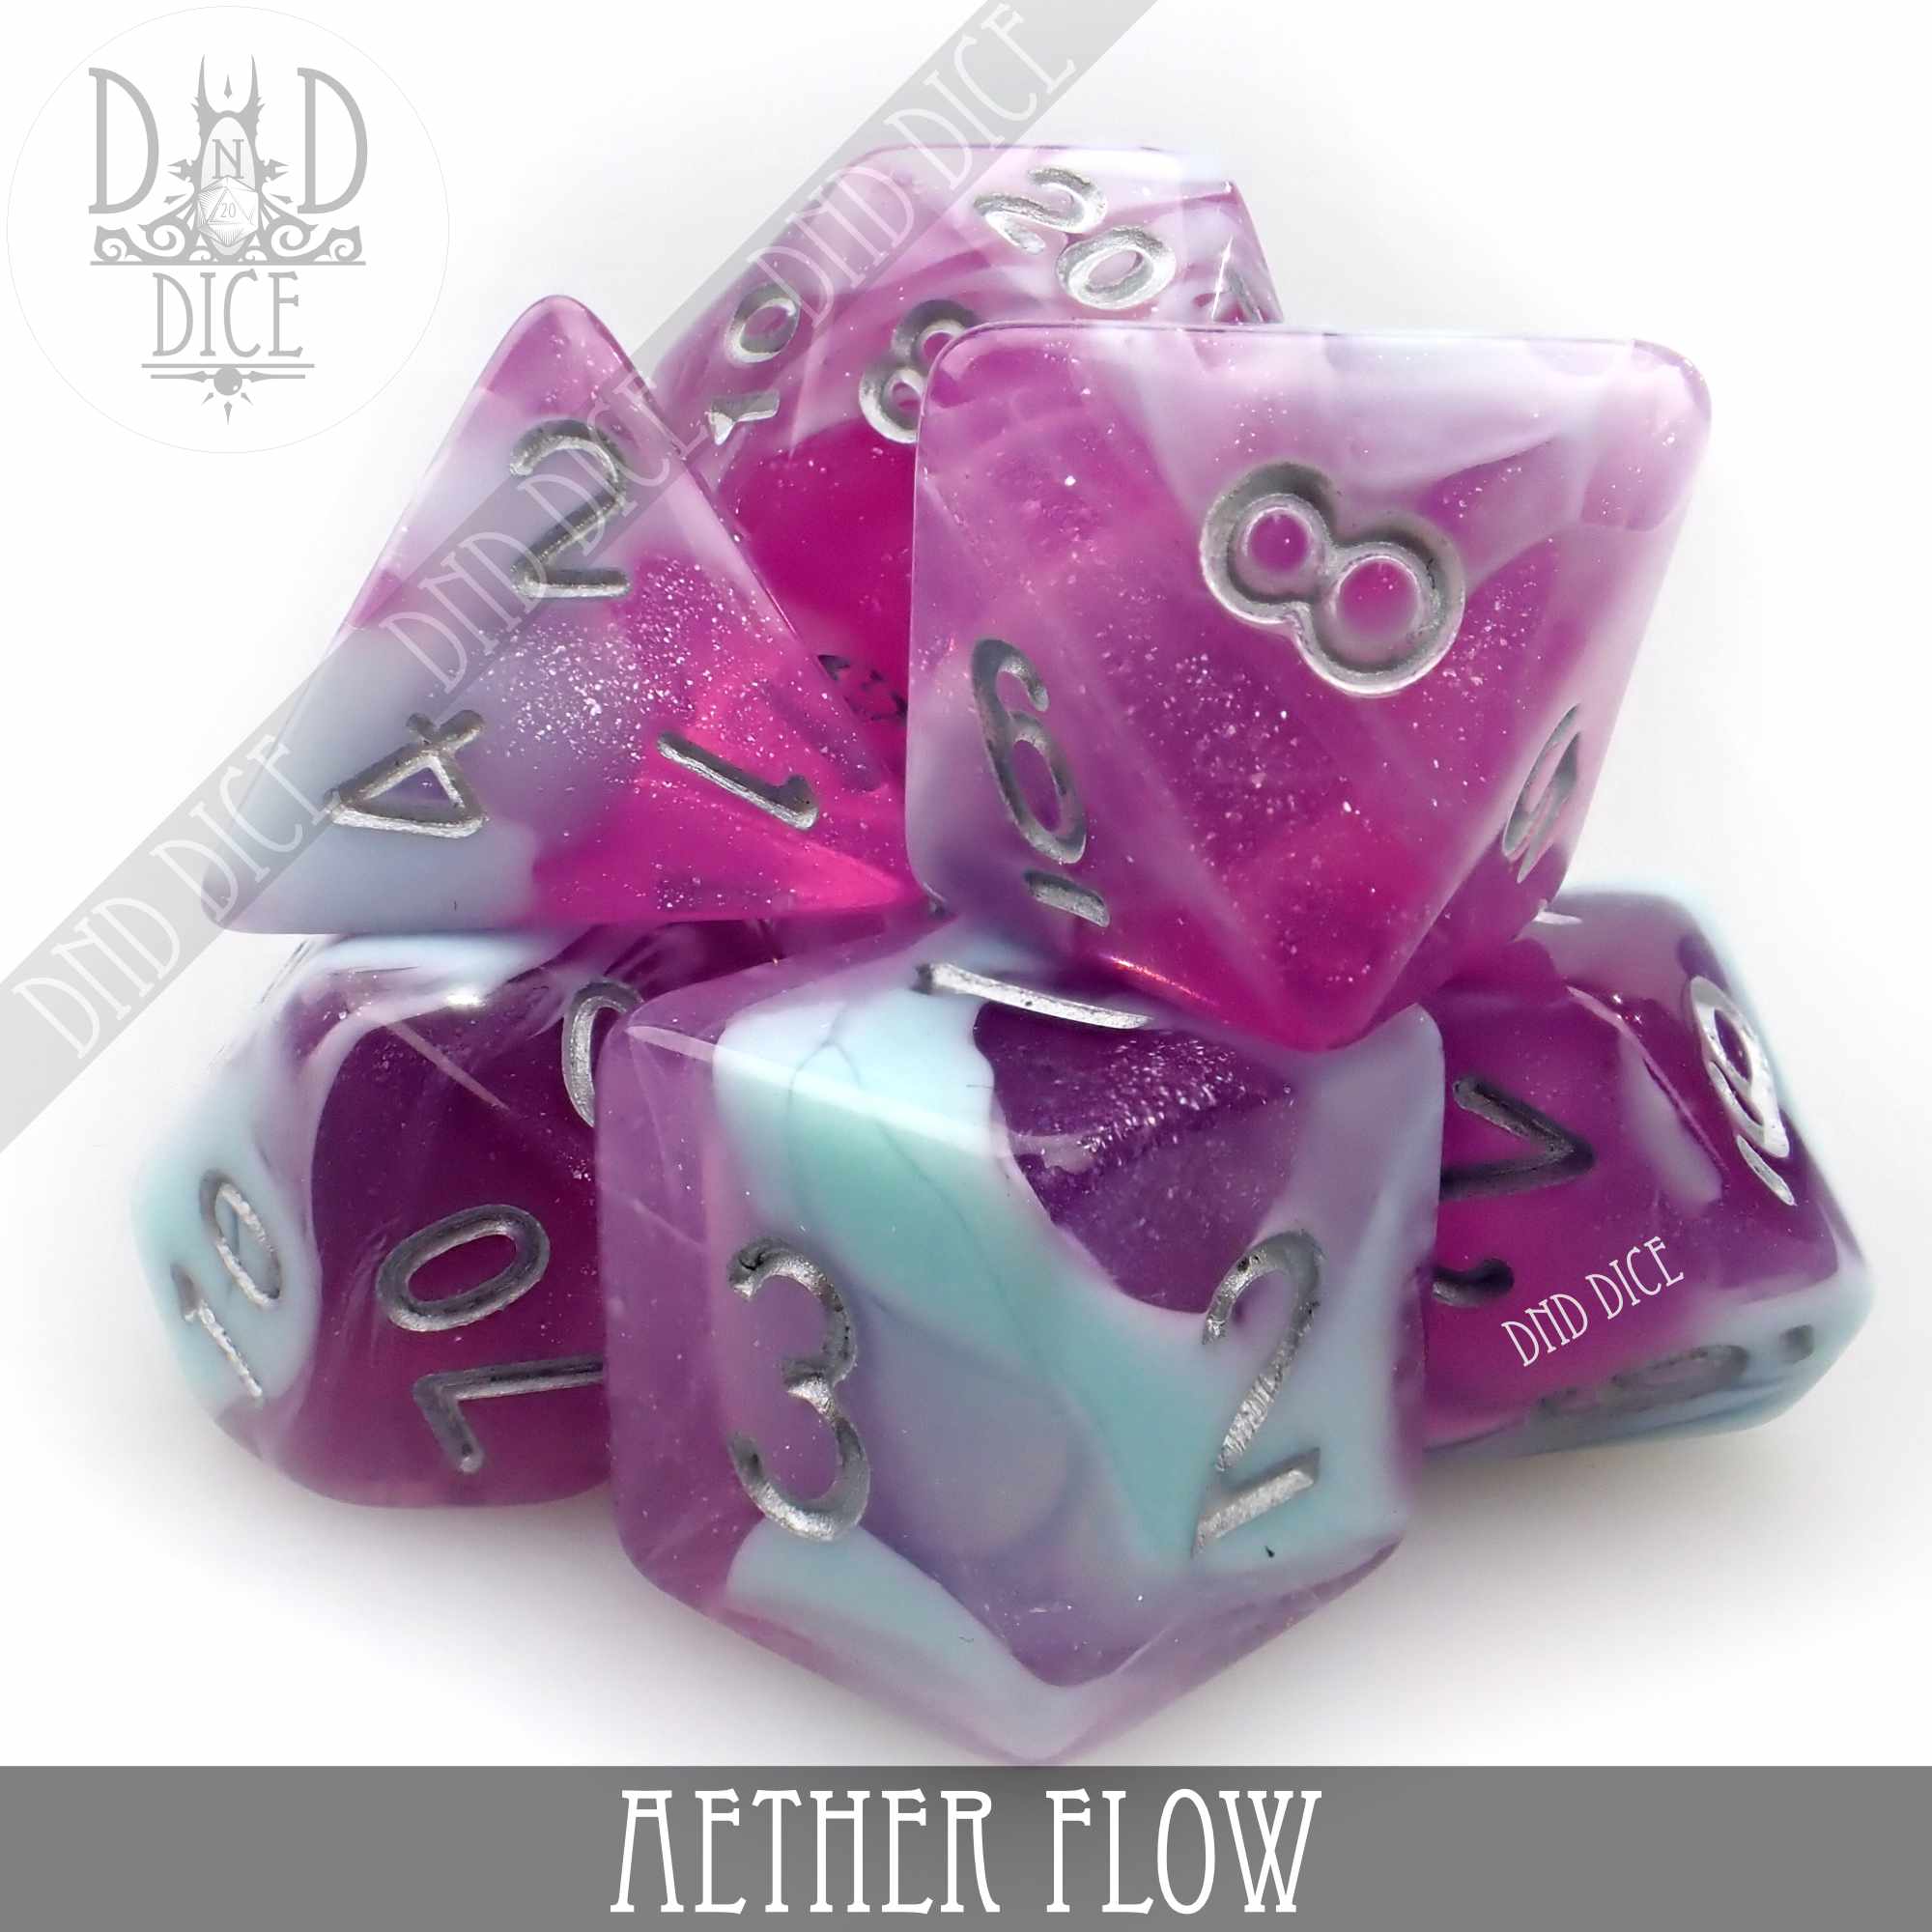 Aether Flow Dice Set